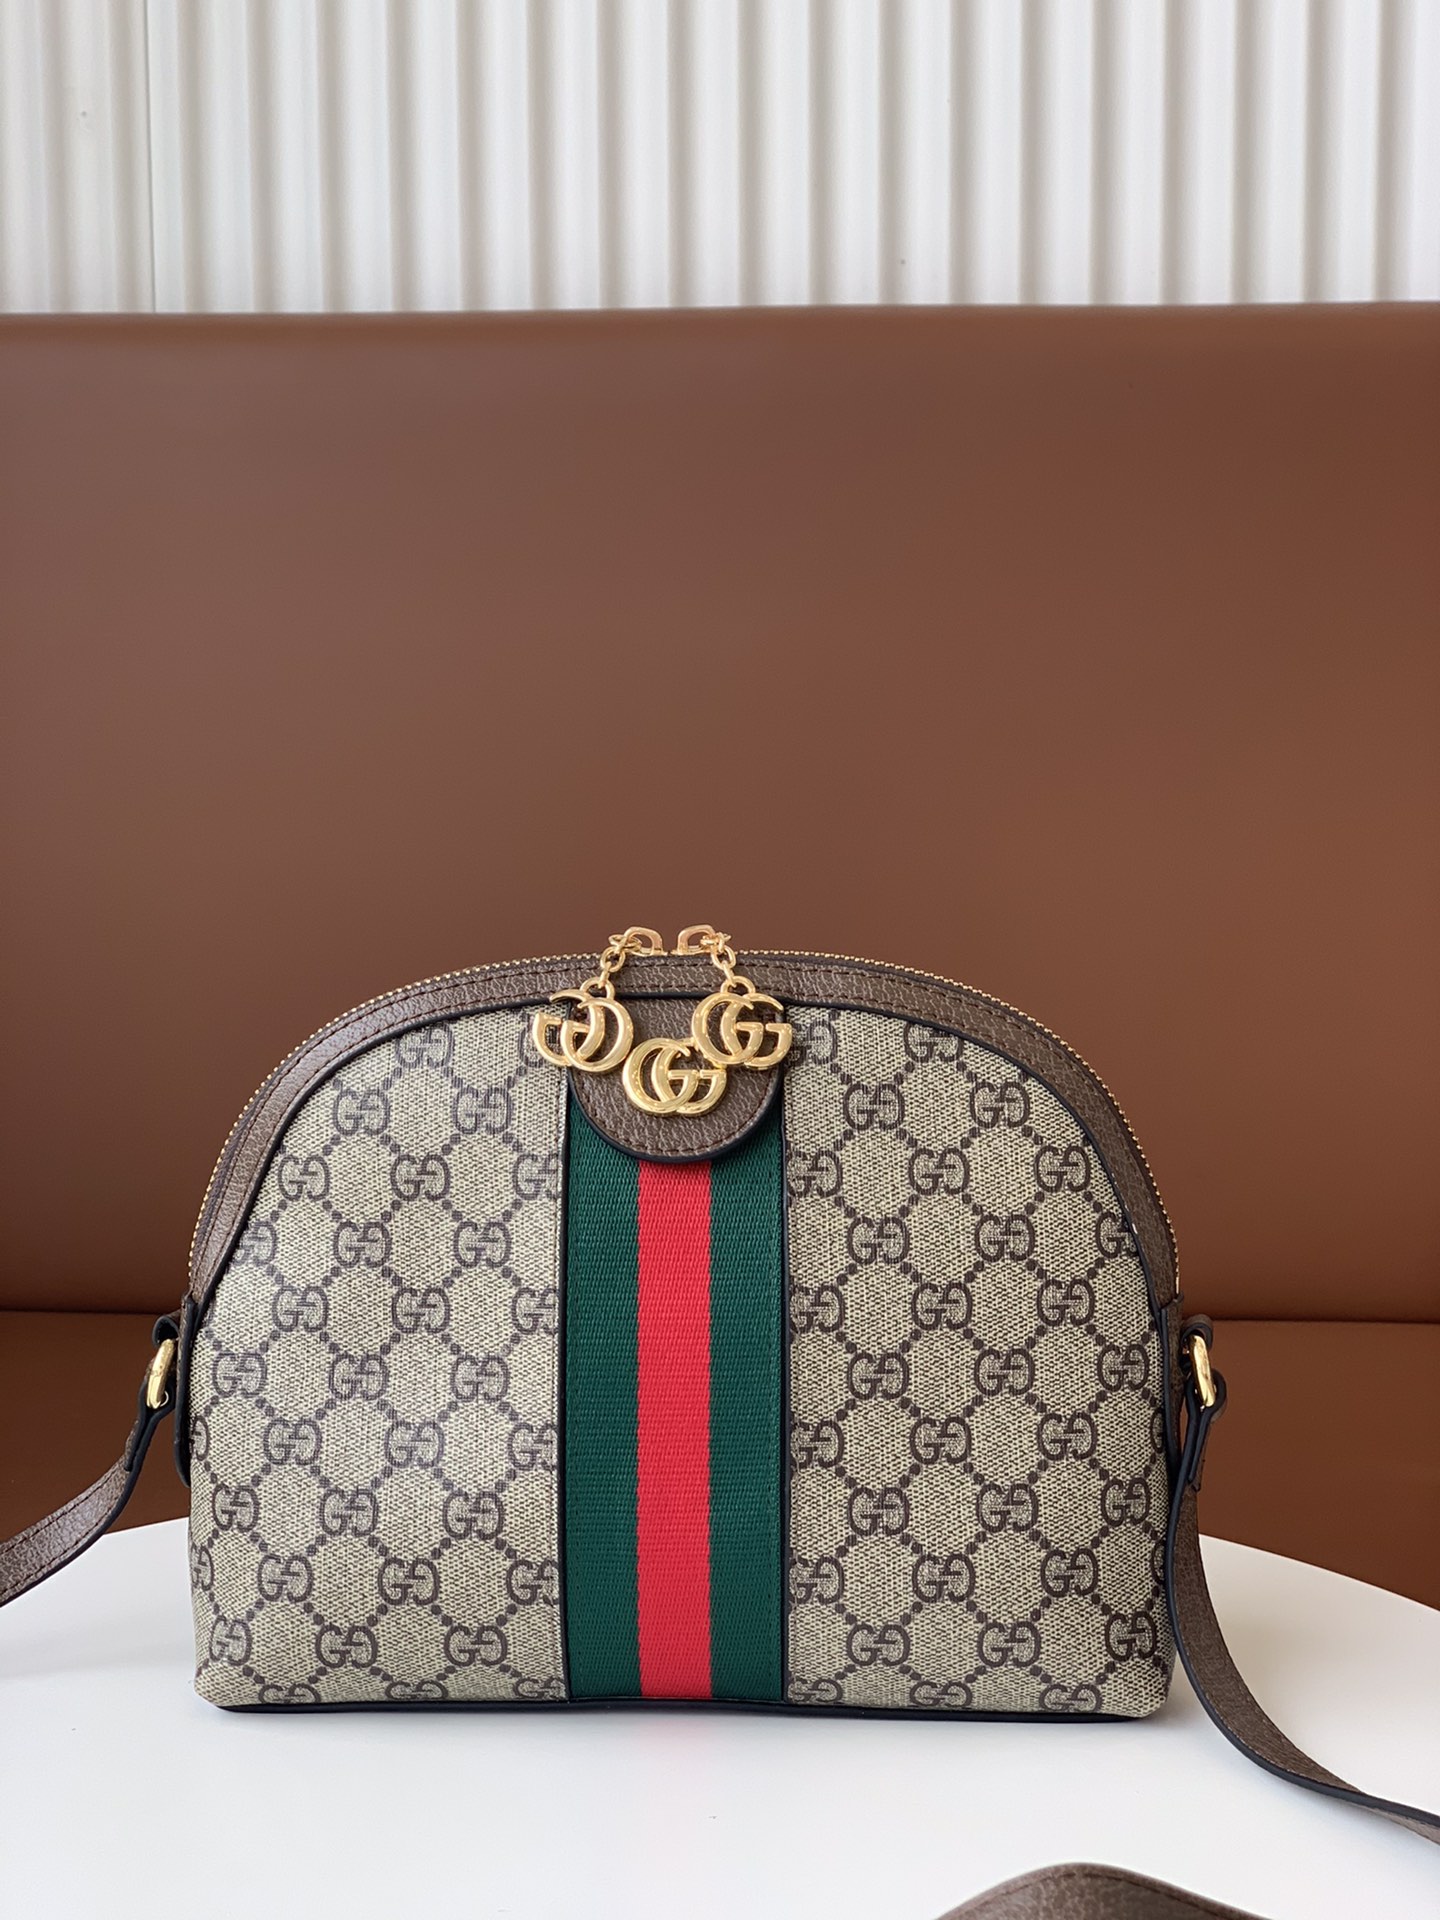 Gucci Ophidia Bags Handbags Coffee Color